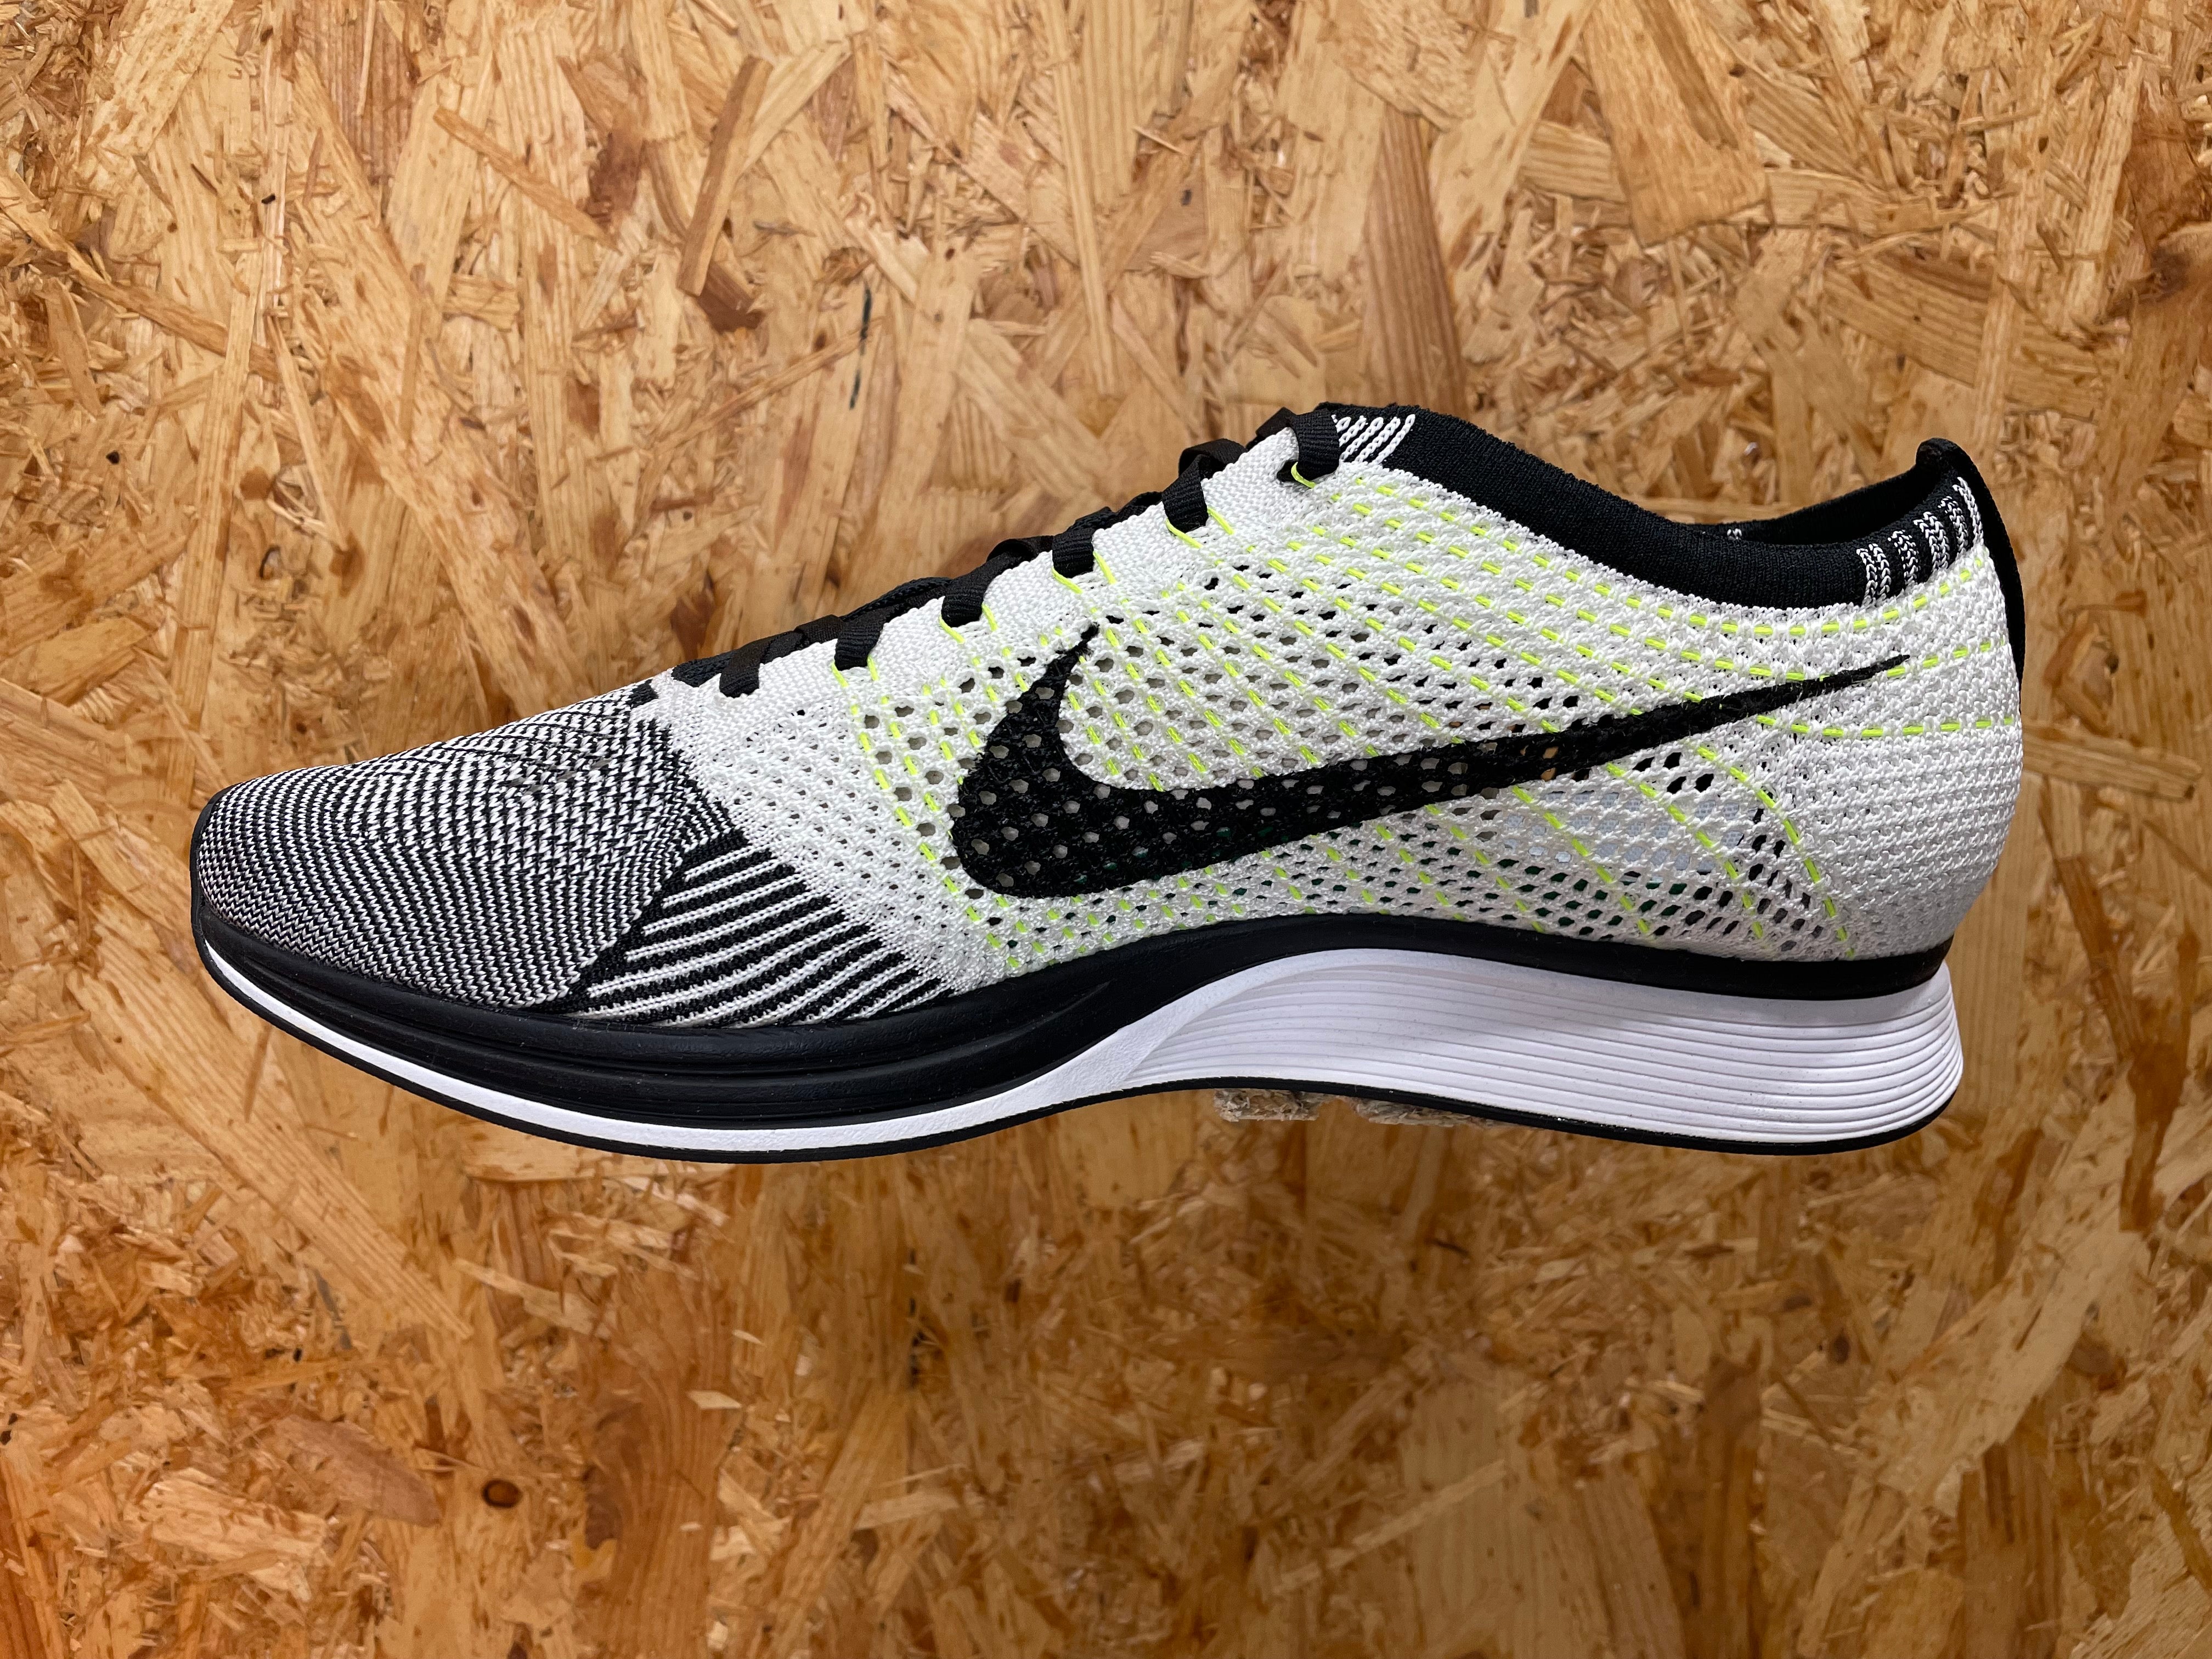 Nike Flyknit racer "Orca Volt" (M) 011 – The Store Brighton